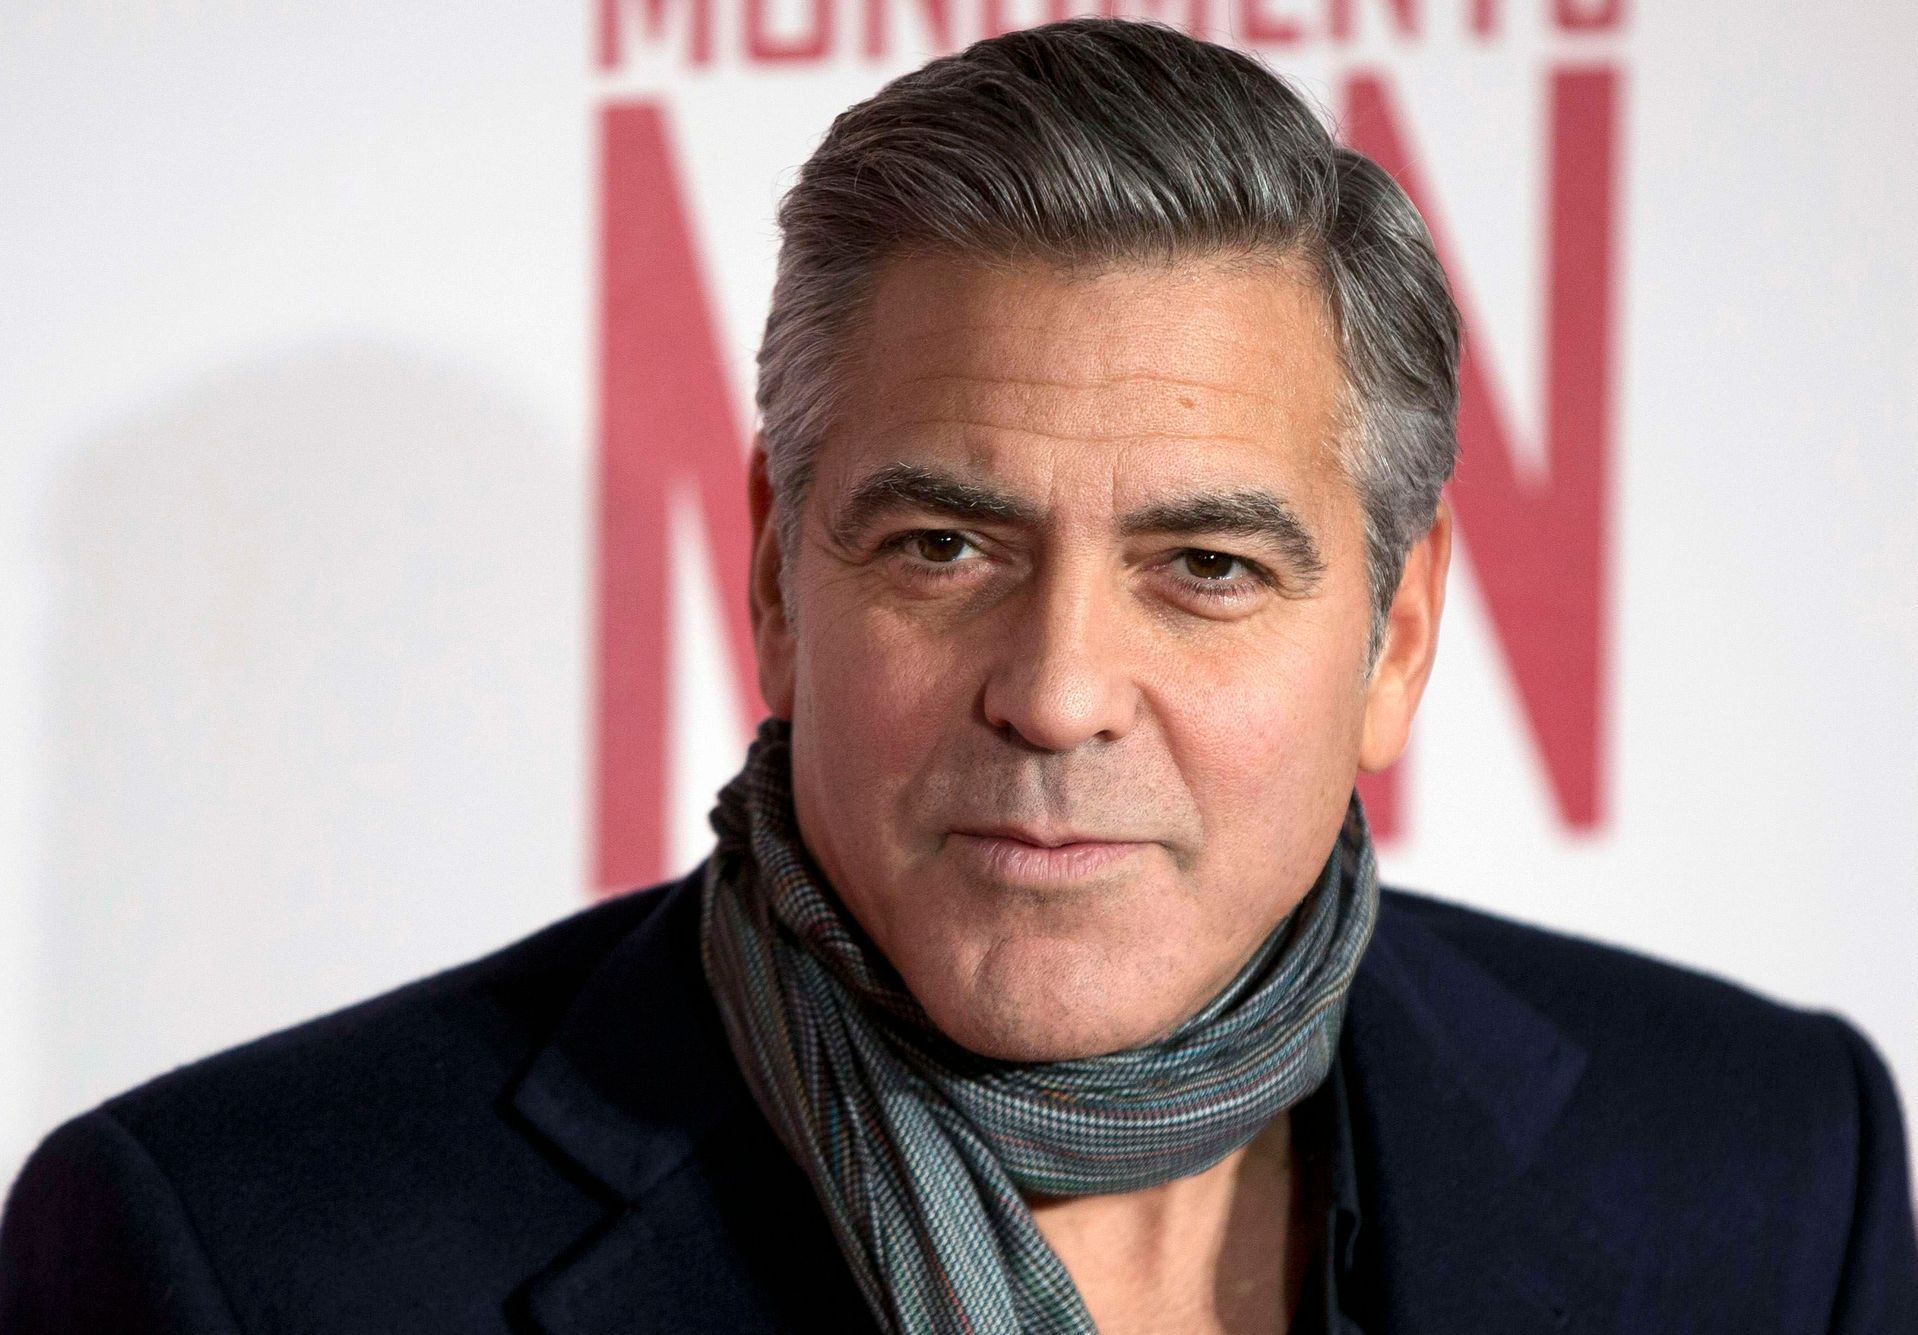 File photo of actor and director George Clooney arriving for the UK premiere of his film &quot;The Monuments Men&quot; in London